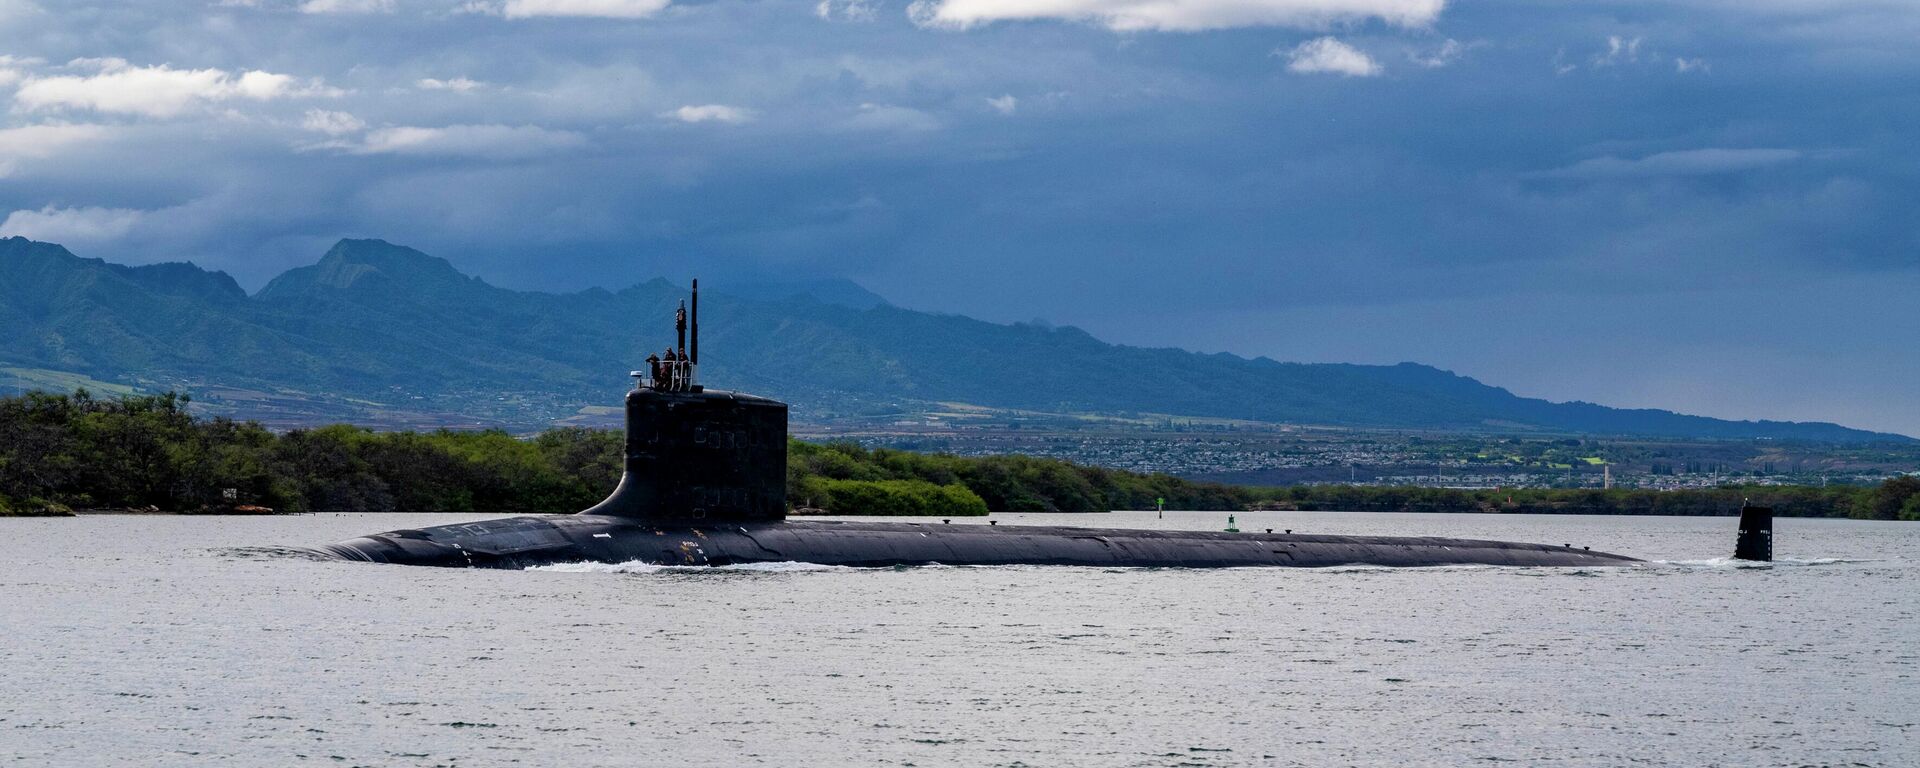 FILE - In this file photo provided by U.S. Navy, the Virginia-class fast-attack submarine USS Missouri (SSN 780) departs Joint Base Pearl Harbor-Hickam for a scheduled deployment in the 7th Fleet area of responsibility, Sept. 1, 2021. The foreign ministers of Malaysia and Indonesia expressed concern Monday, Oct. 18, 2021, that Australia’s plan to acquire nuclear-powered submarines from the U.S. in a security alliance may increase the rivalry of major powers in Southeast Asia - Sputnik International, 1920, 10.05.2023